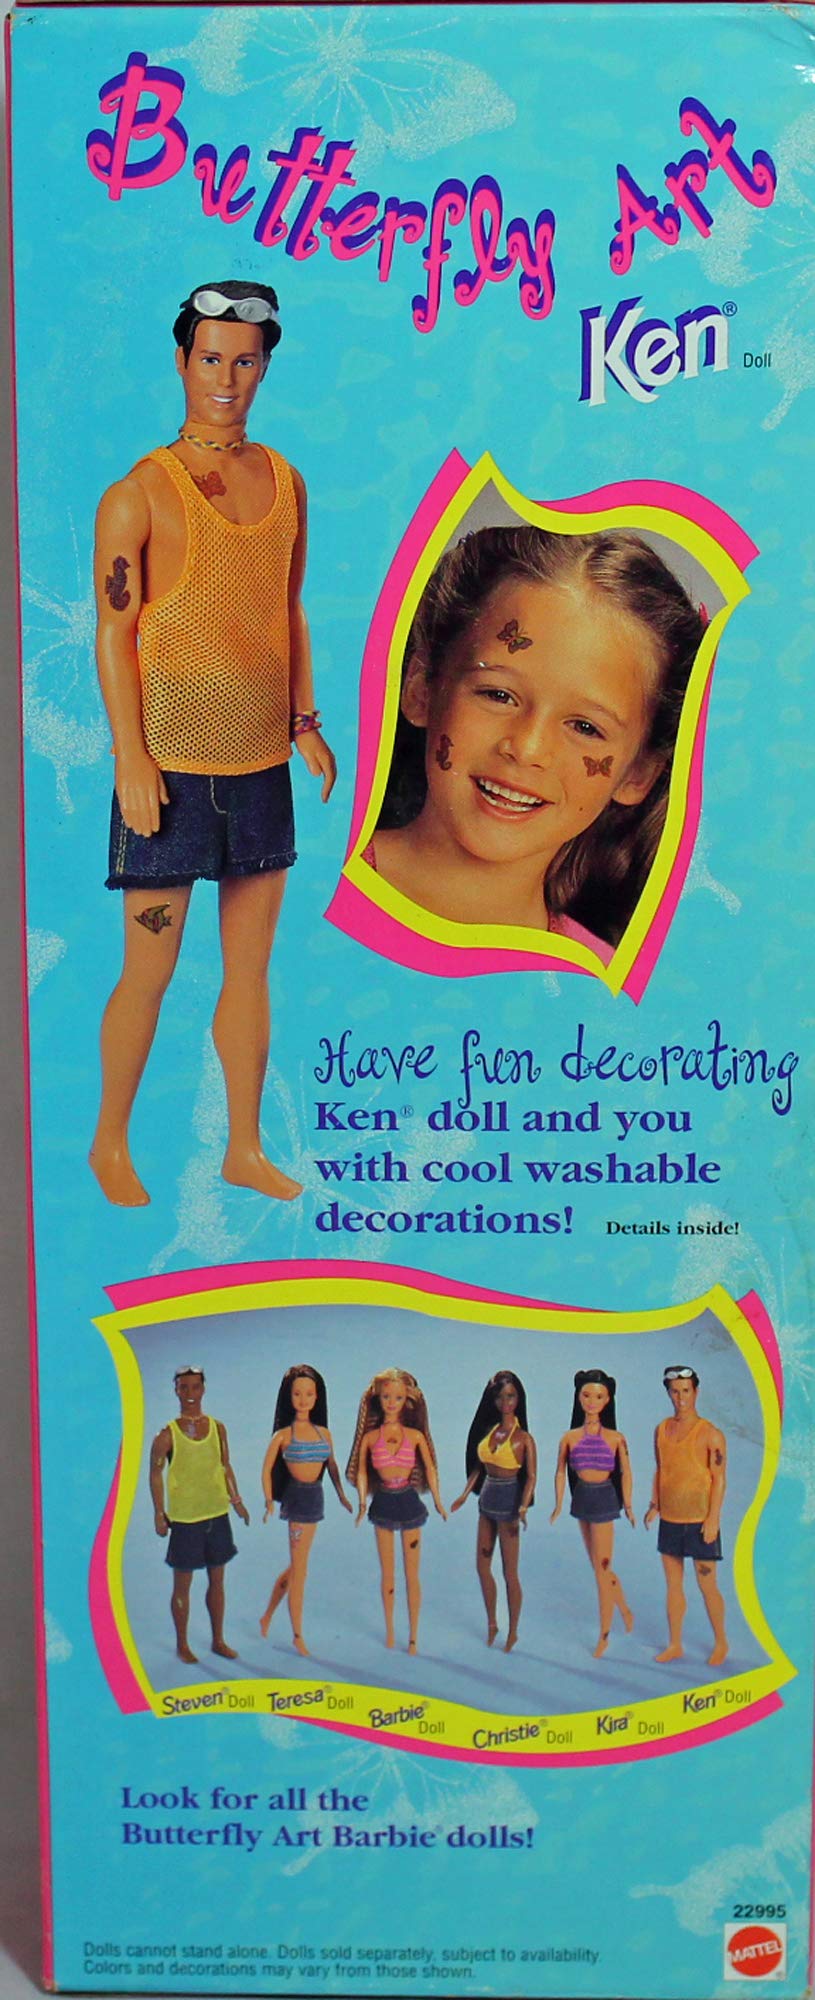 1998 - Mattel - Friends of Barbie - Butterfly Art Ken Doll - 12 Inches Tall - 2 Sheets of Decorations - Includes Jeans Shorts / Sunglasses / Tank Top / Necklace - New - Out of Production - Limited Edition - Collectible